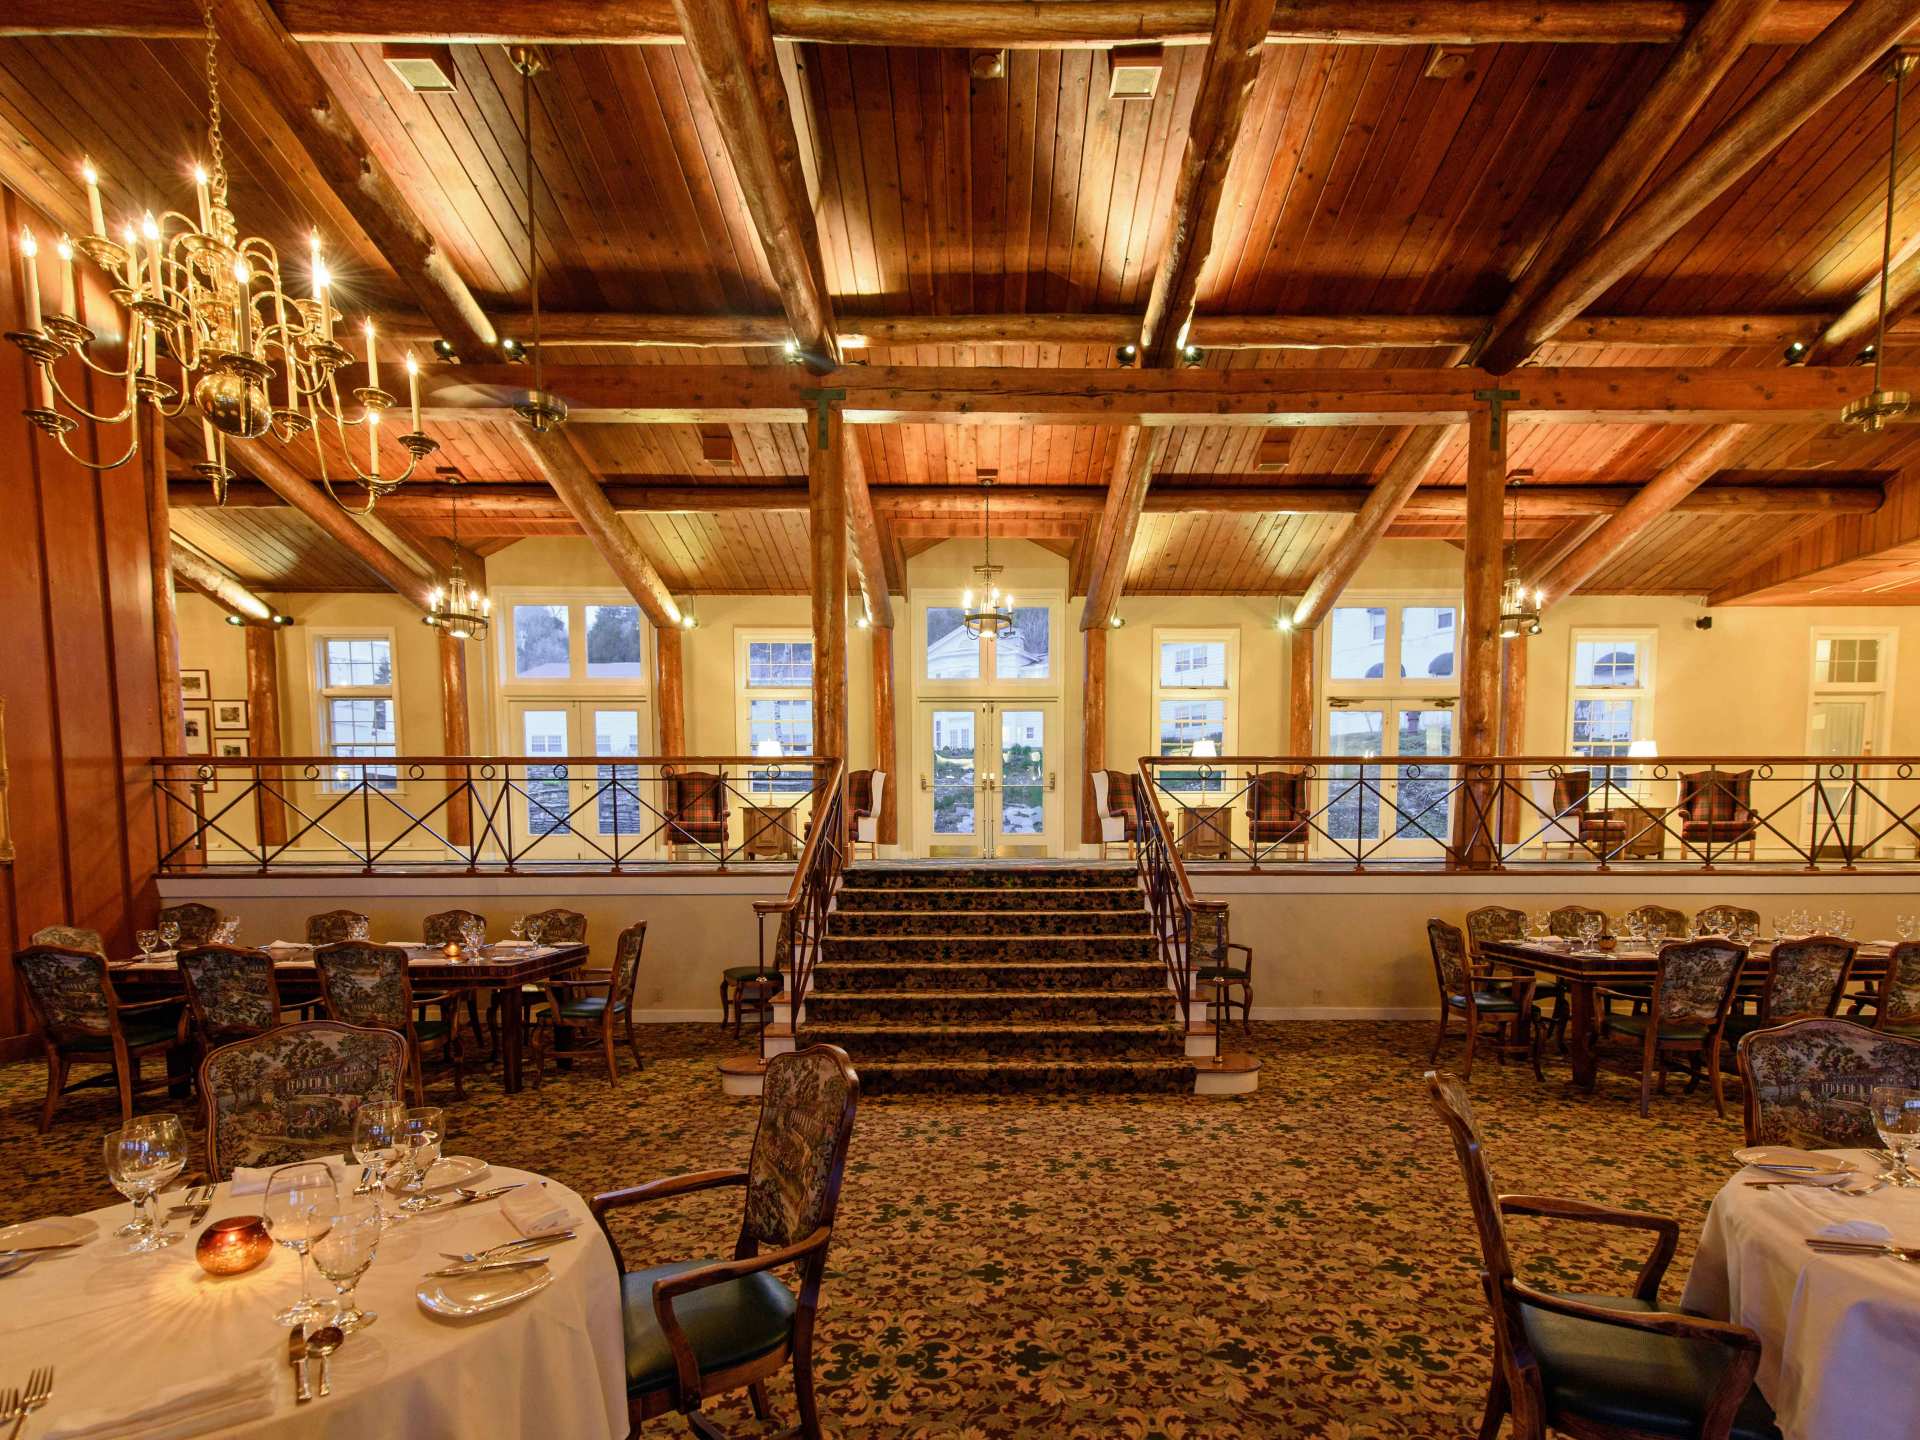 Mission Point resort | The dining room at Chianti restaurant